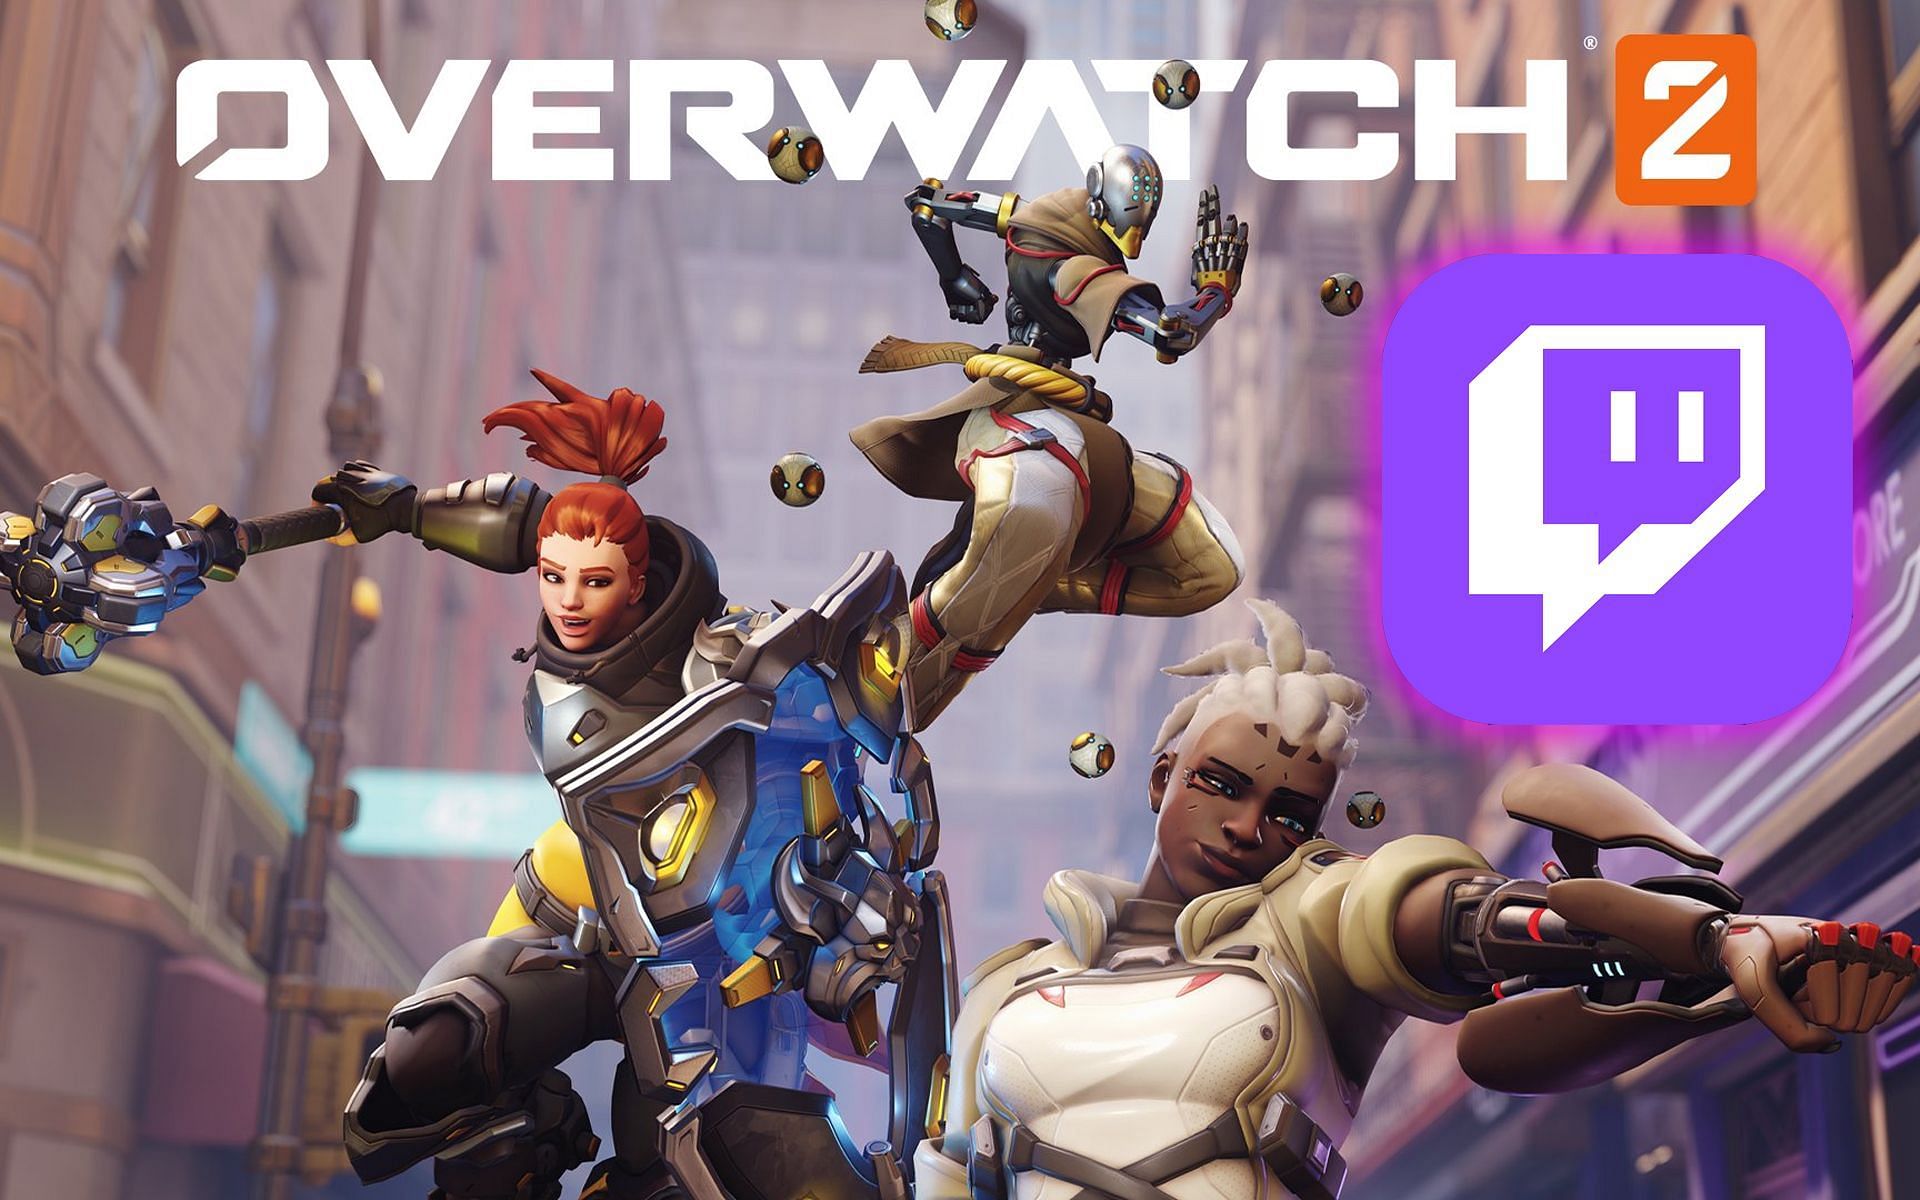 How to link Twitch with a Battle.net account for Overwatch 2 beta (Image via Blizzard Entertainment/Twitch)